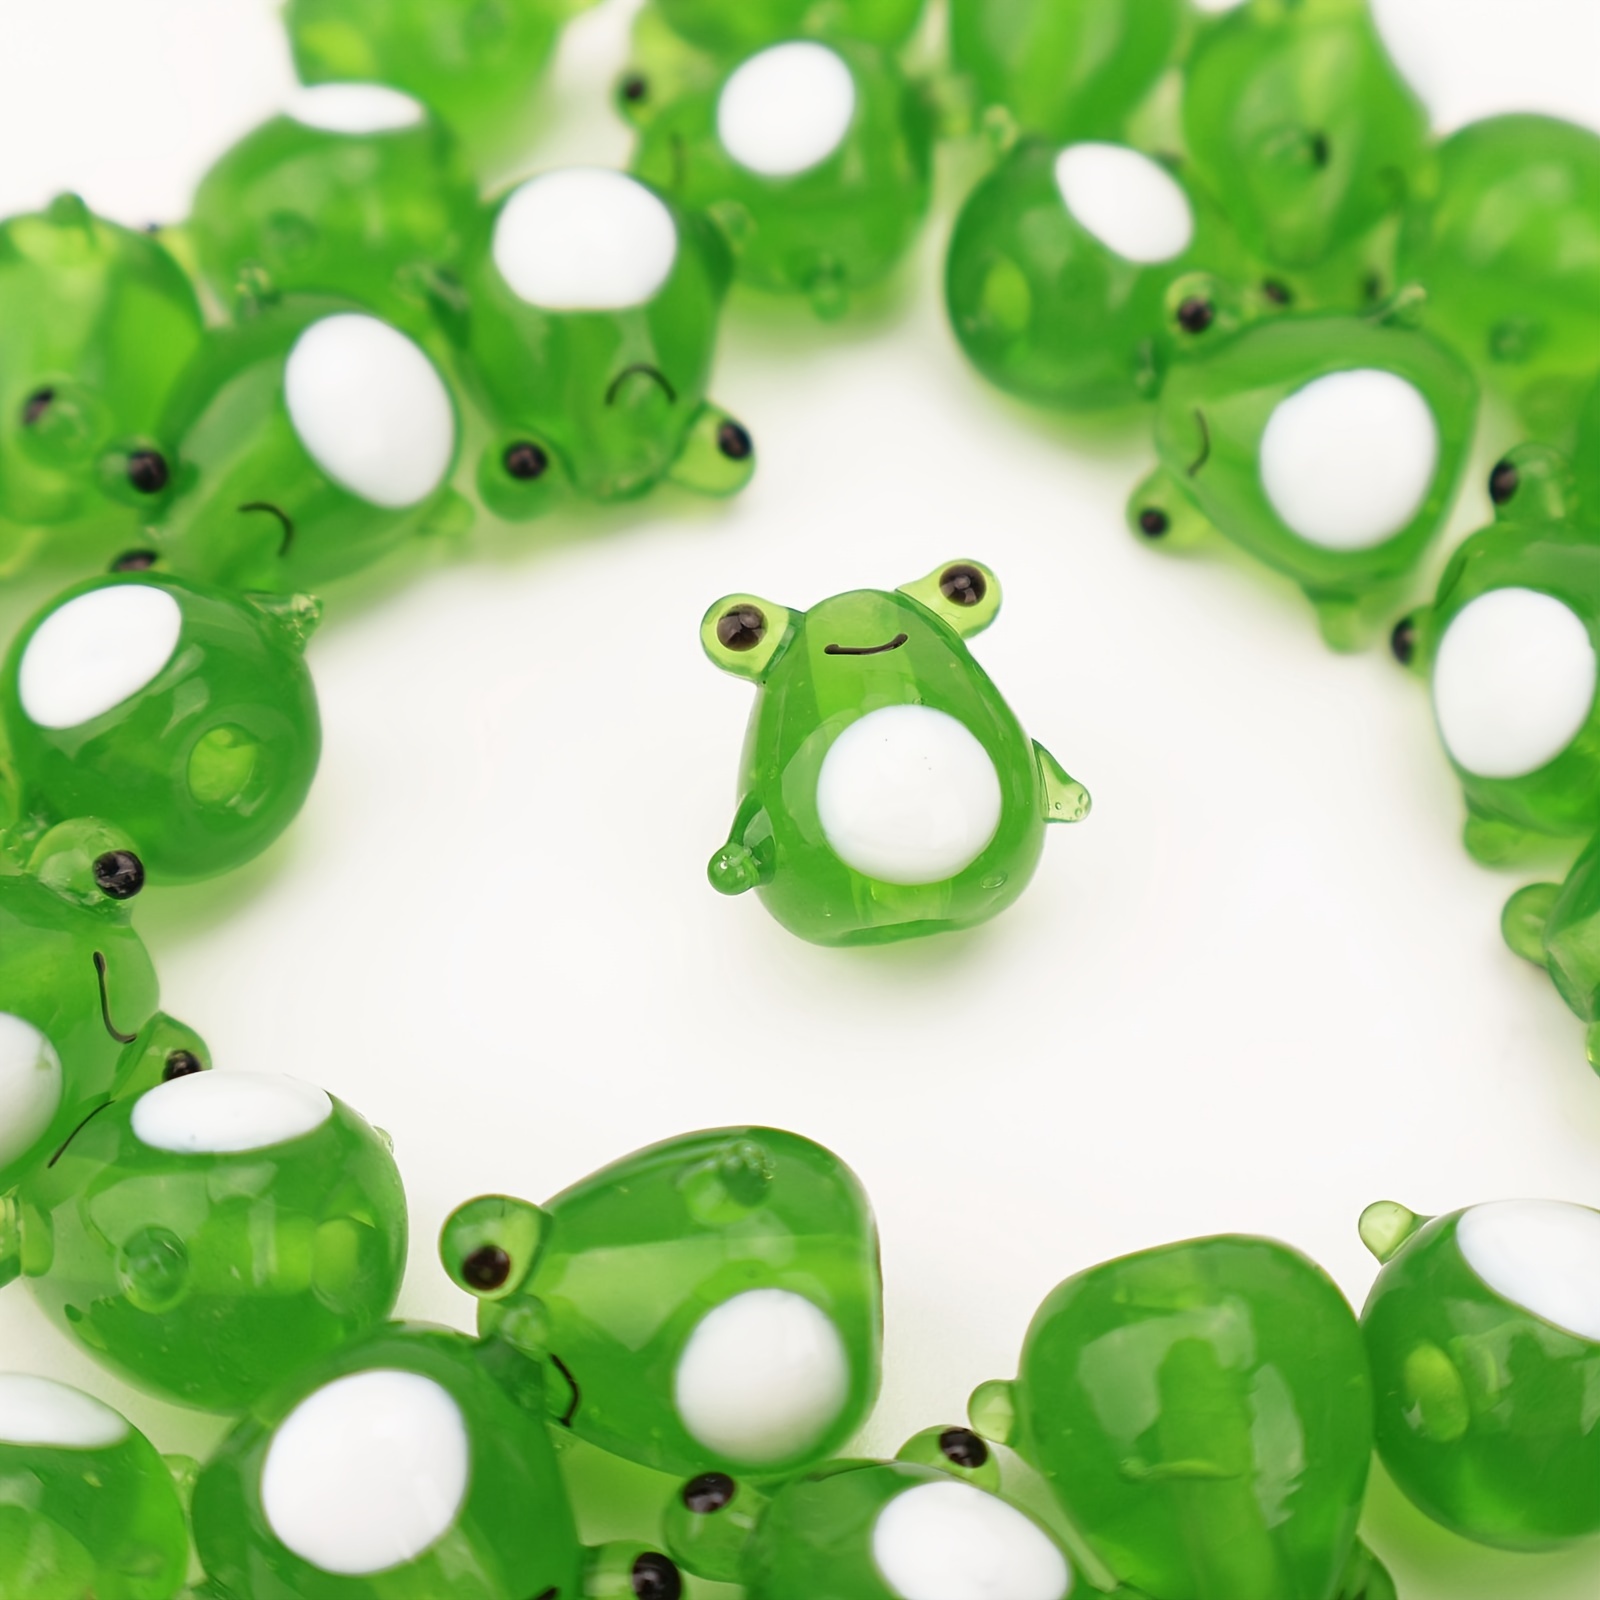 

Handmade 3d Frog-shaped Glass Beads For Jewelry Making, Diy Accessories - 2 Pcs Lampwork Bead Set For Bracelets, Necklaces, Earrings